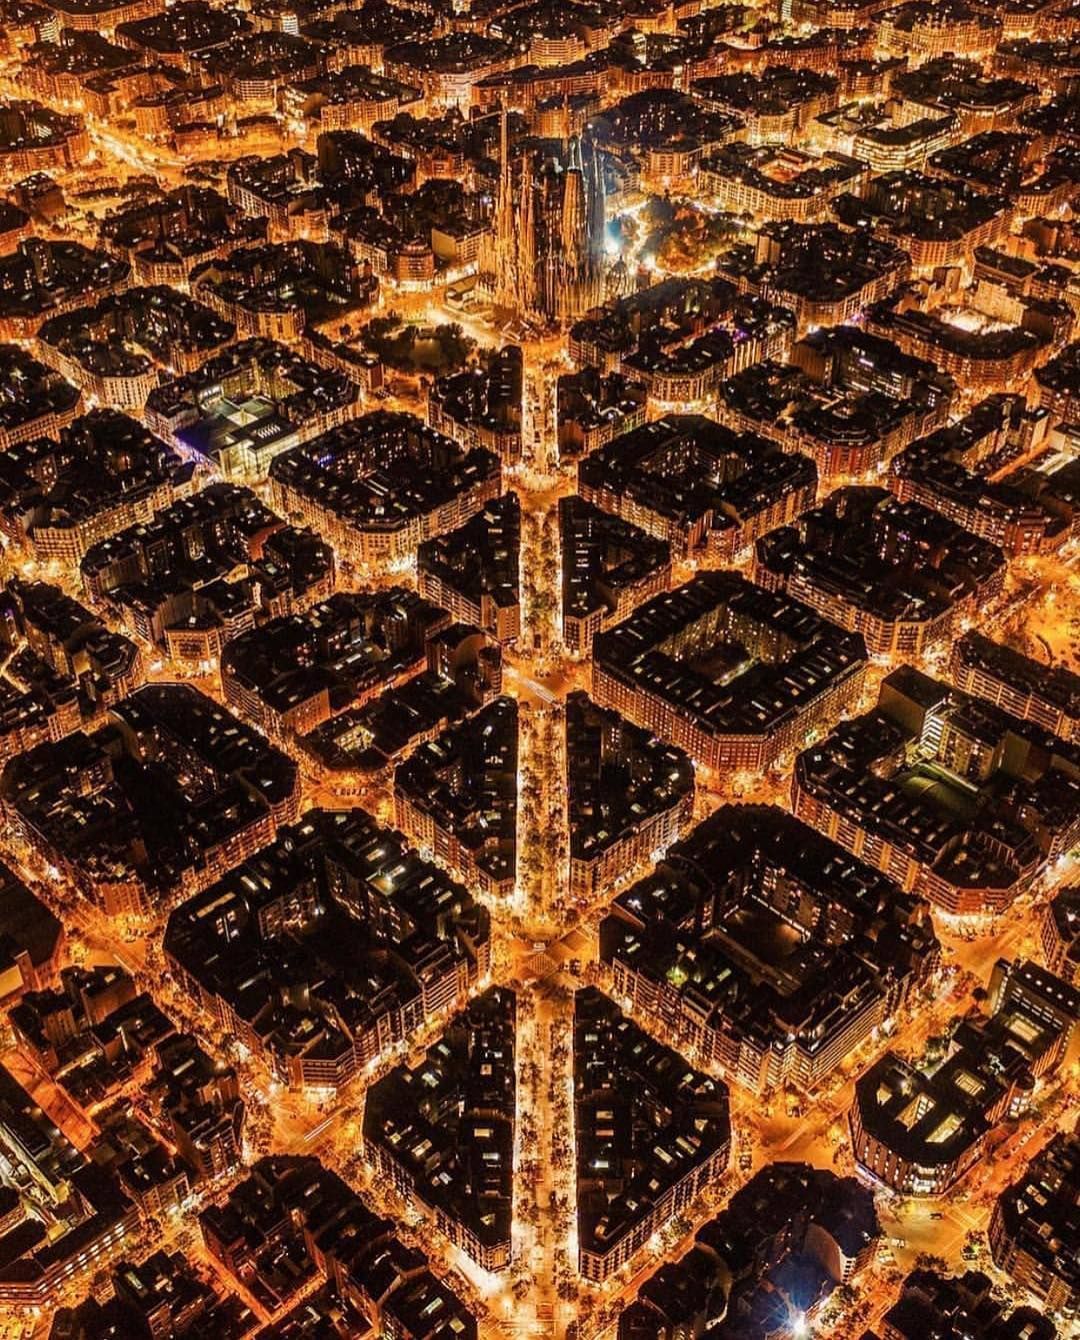 Barcelona at night #city #cities #buildings #photography. City